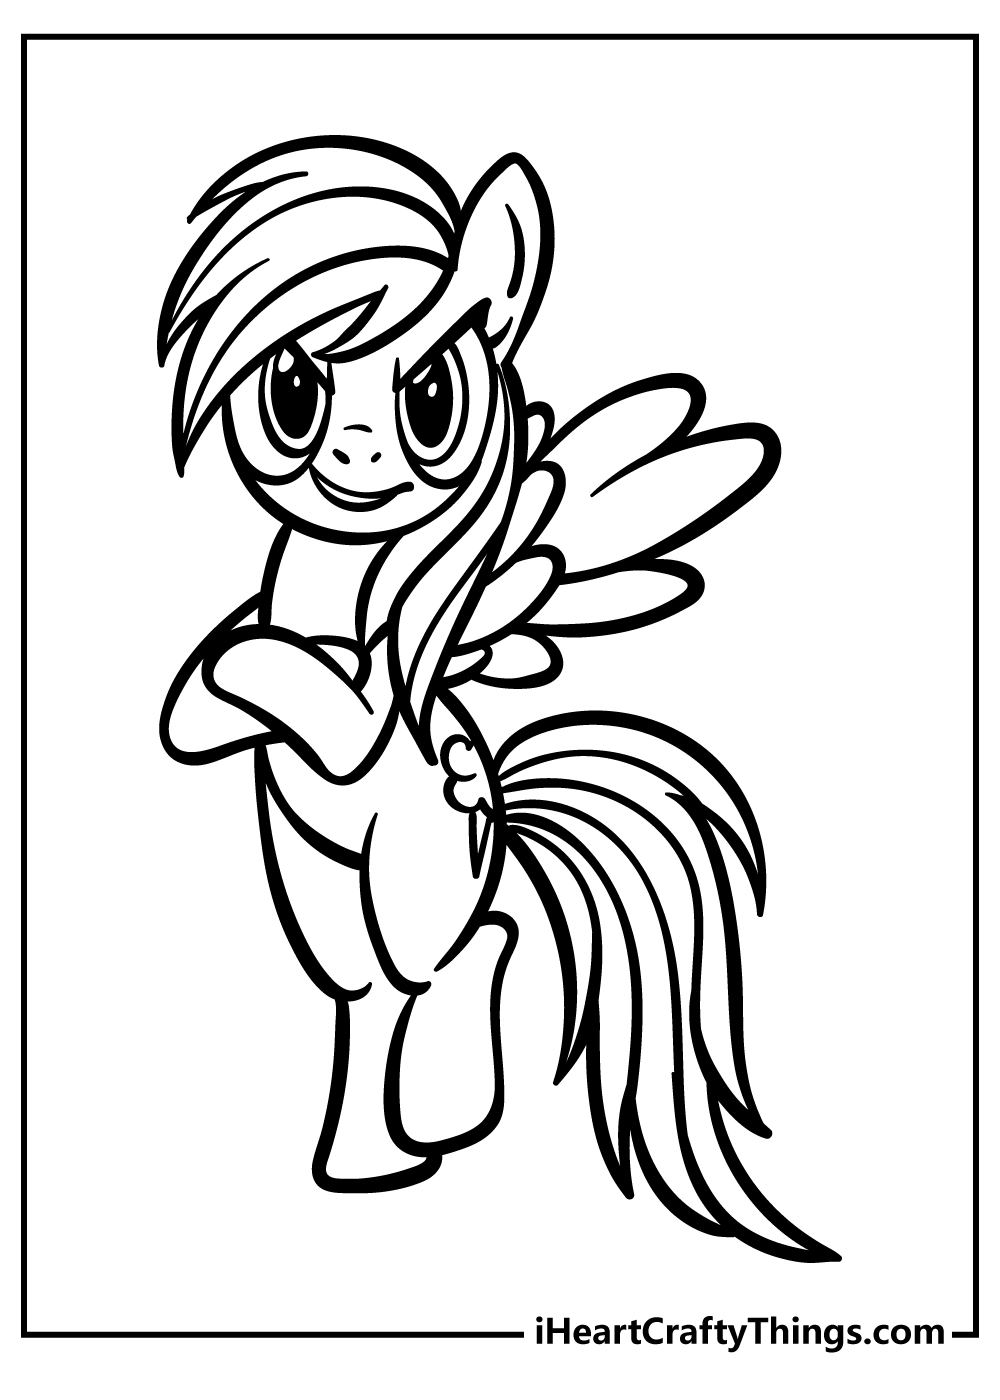 Rainbow Dash Coloring Book for adults free download